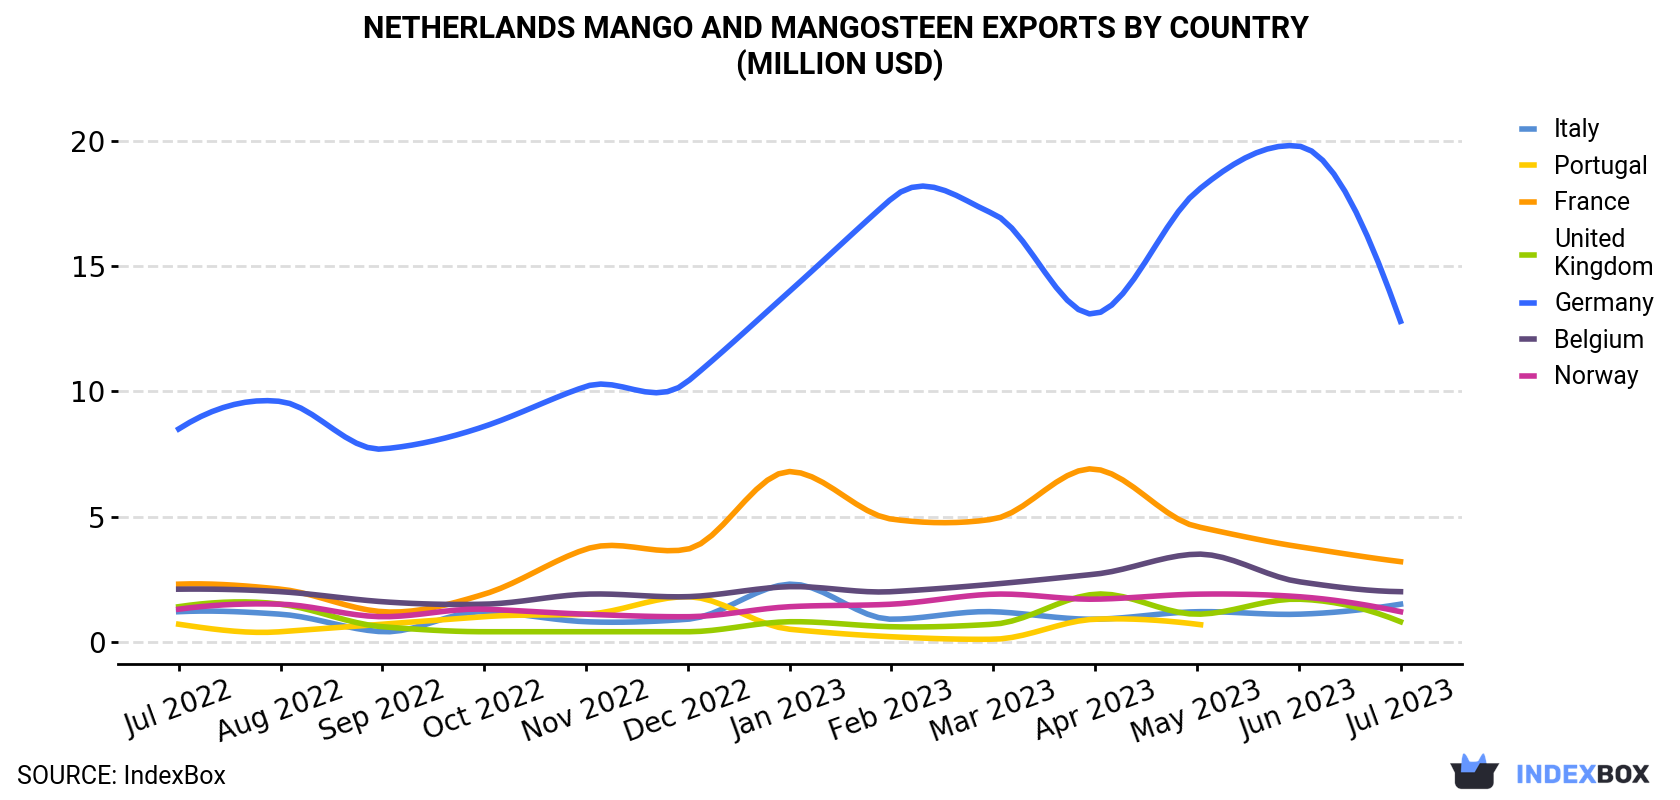 Netherlands Mango And Mangosteen Exports By Country (Million USD)